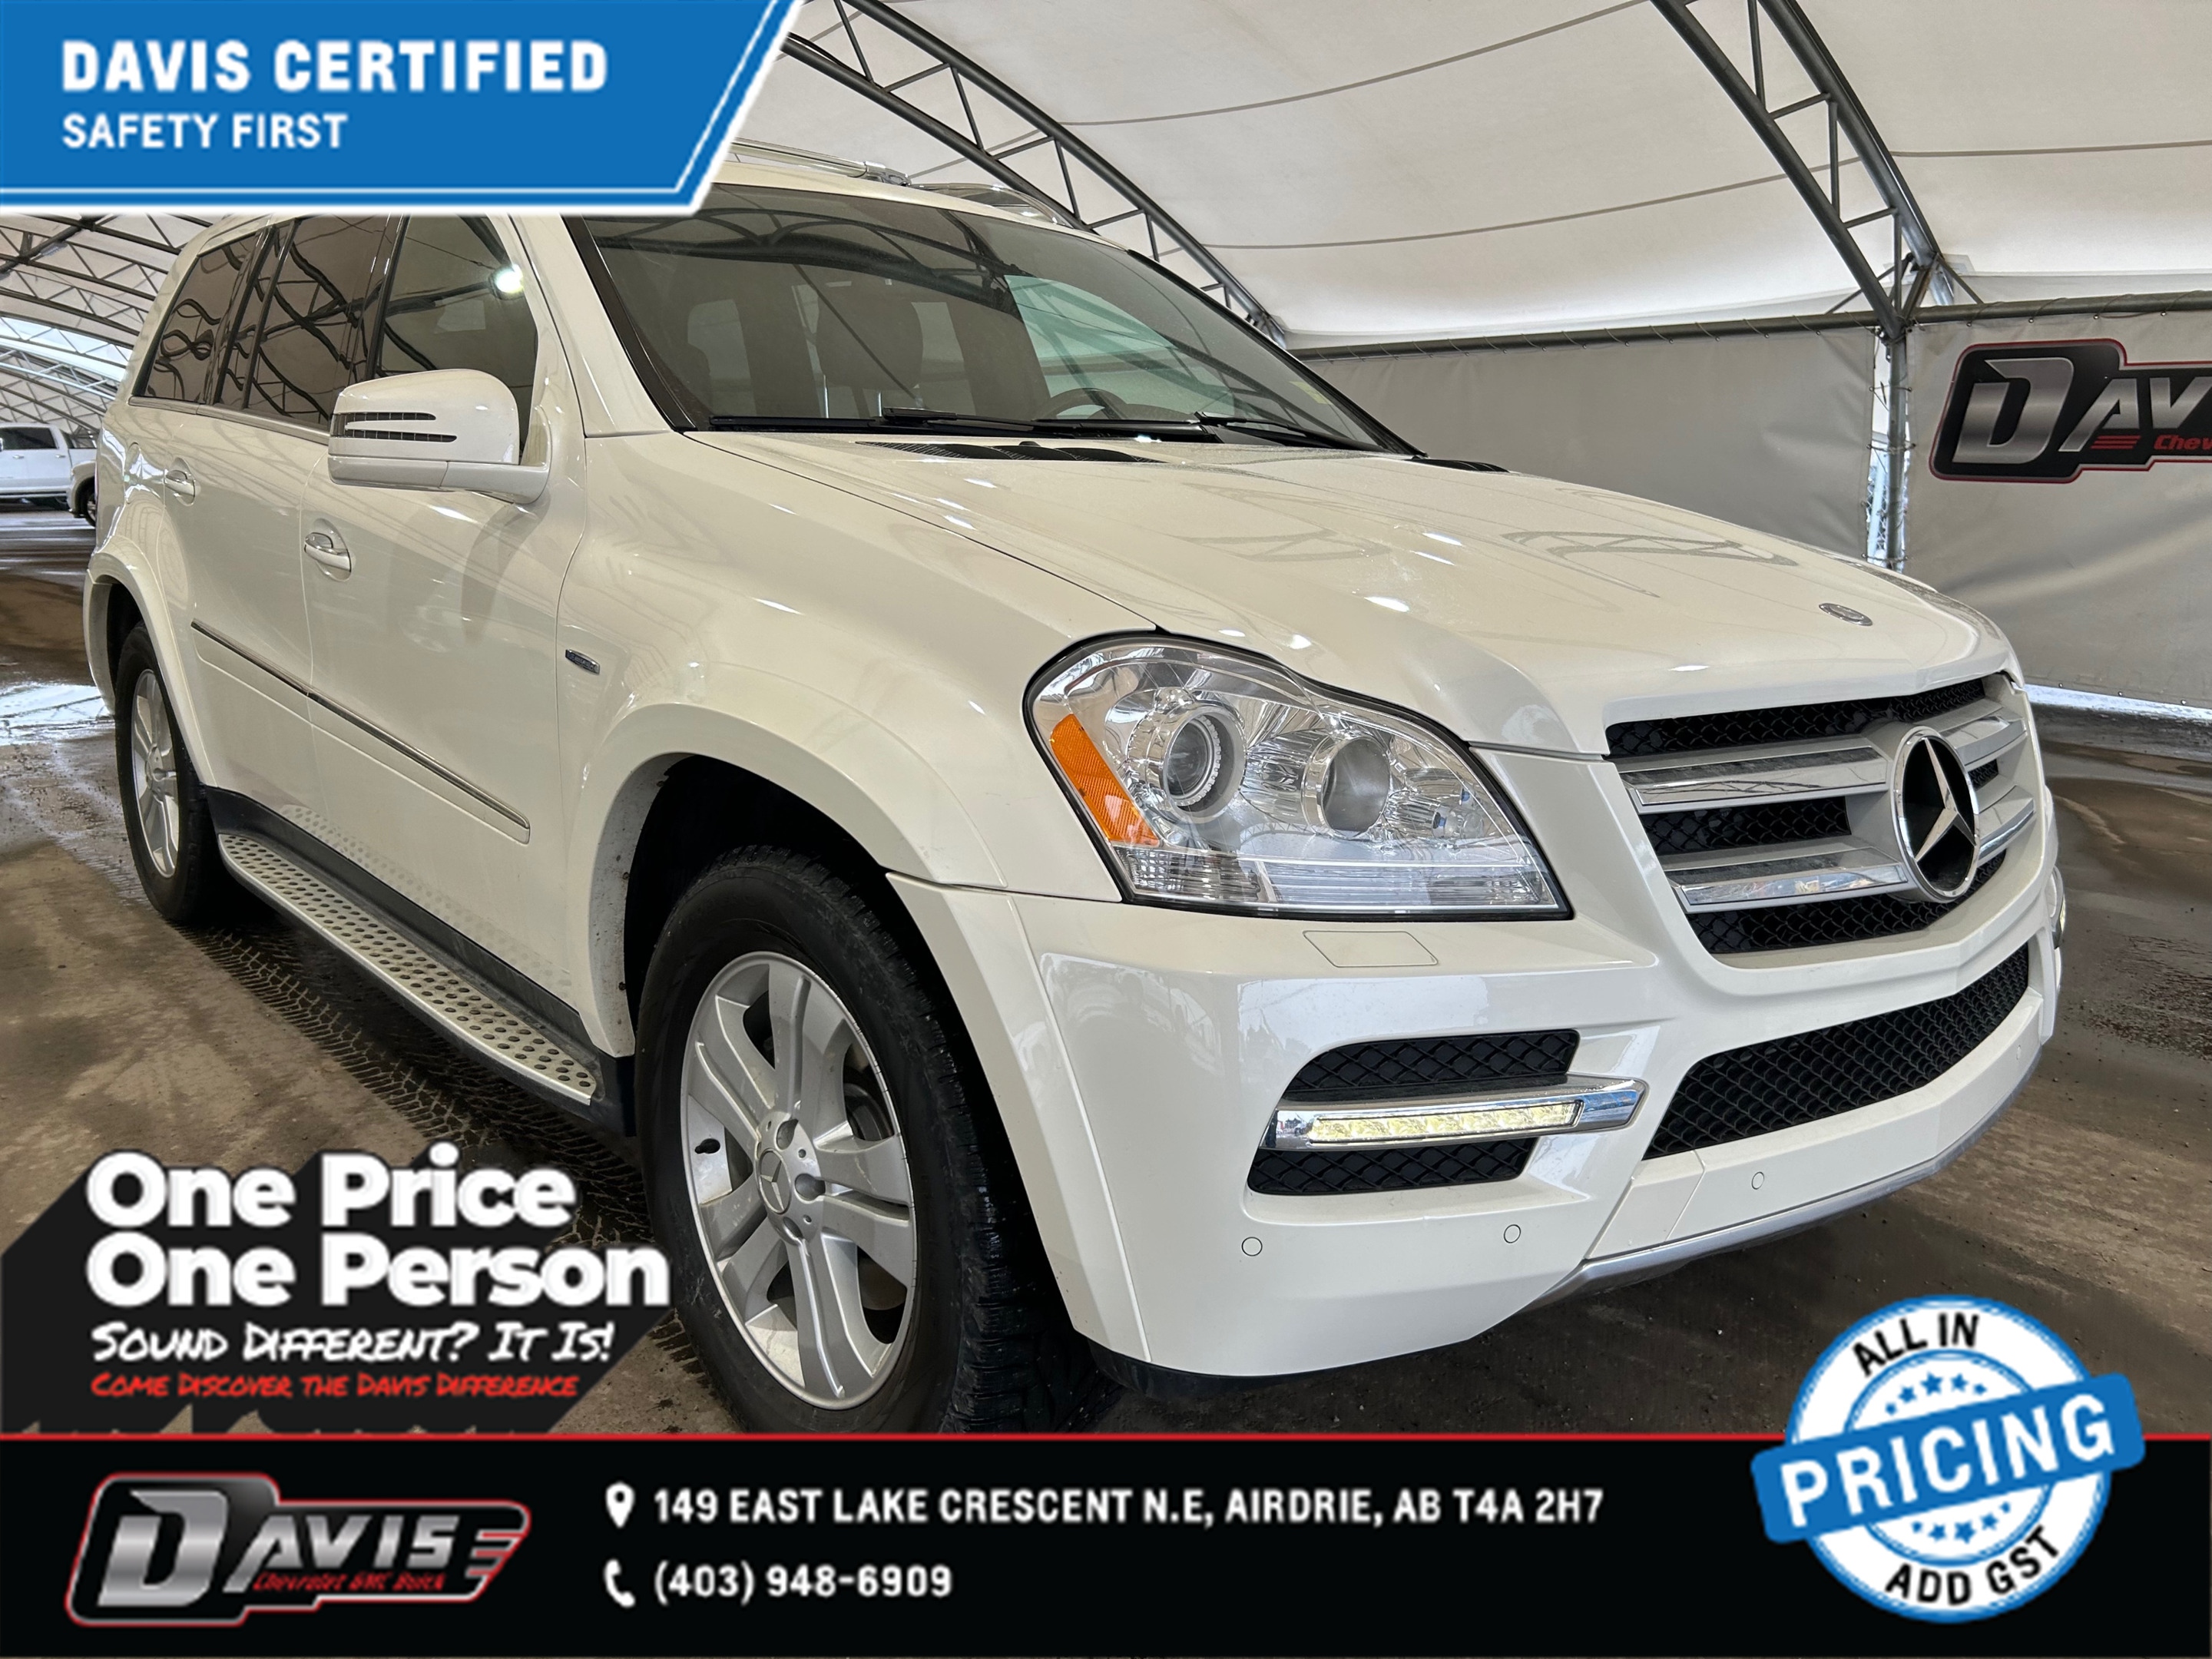 2012 Mercedes-Benz GL-Class LUXURY SUV FOR THE WHOLE FAMILY - EFFICIENT & RELI